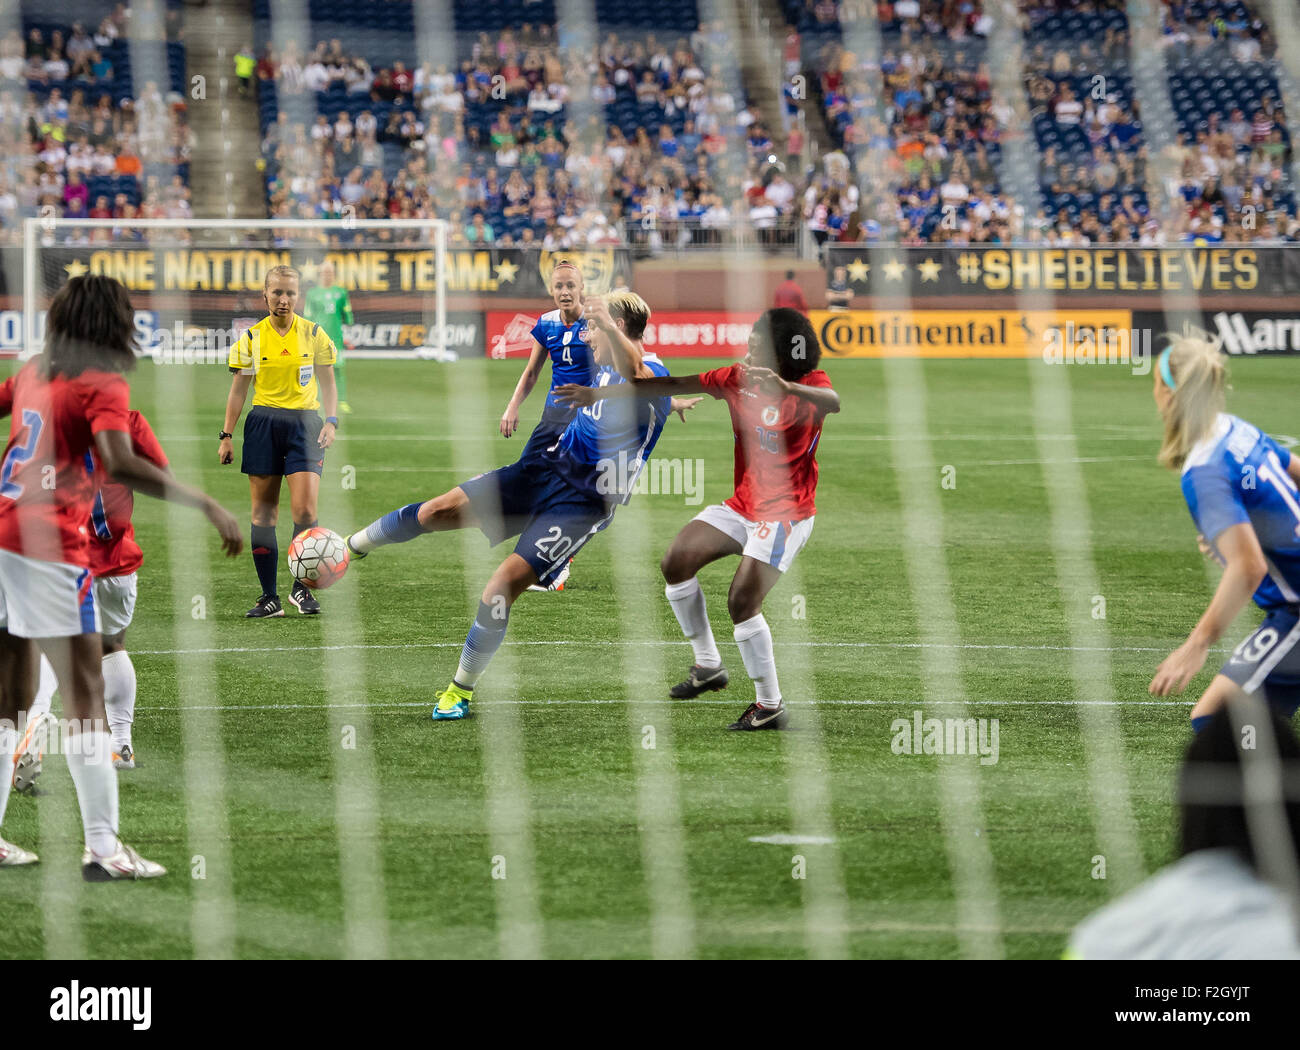 Detroit, Michigan, USA. 17th Sep, 2015. Abby Wambach, USA (20), takes a shot on goal during the International Friendly Soccer Match between the United States Women's National Team and the Haitian Women's National Team at Ford Field in Detroit, Michigan. USA won the match 5-0. Credit:  Scott Hasse/ZUMA Wire/Alamy Live News Stock Photo